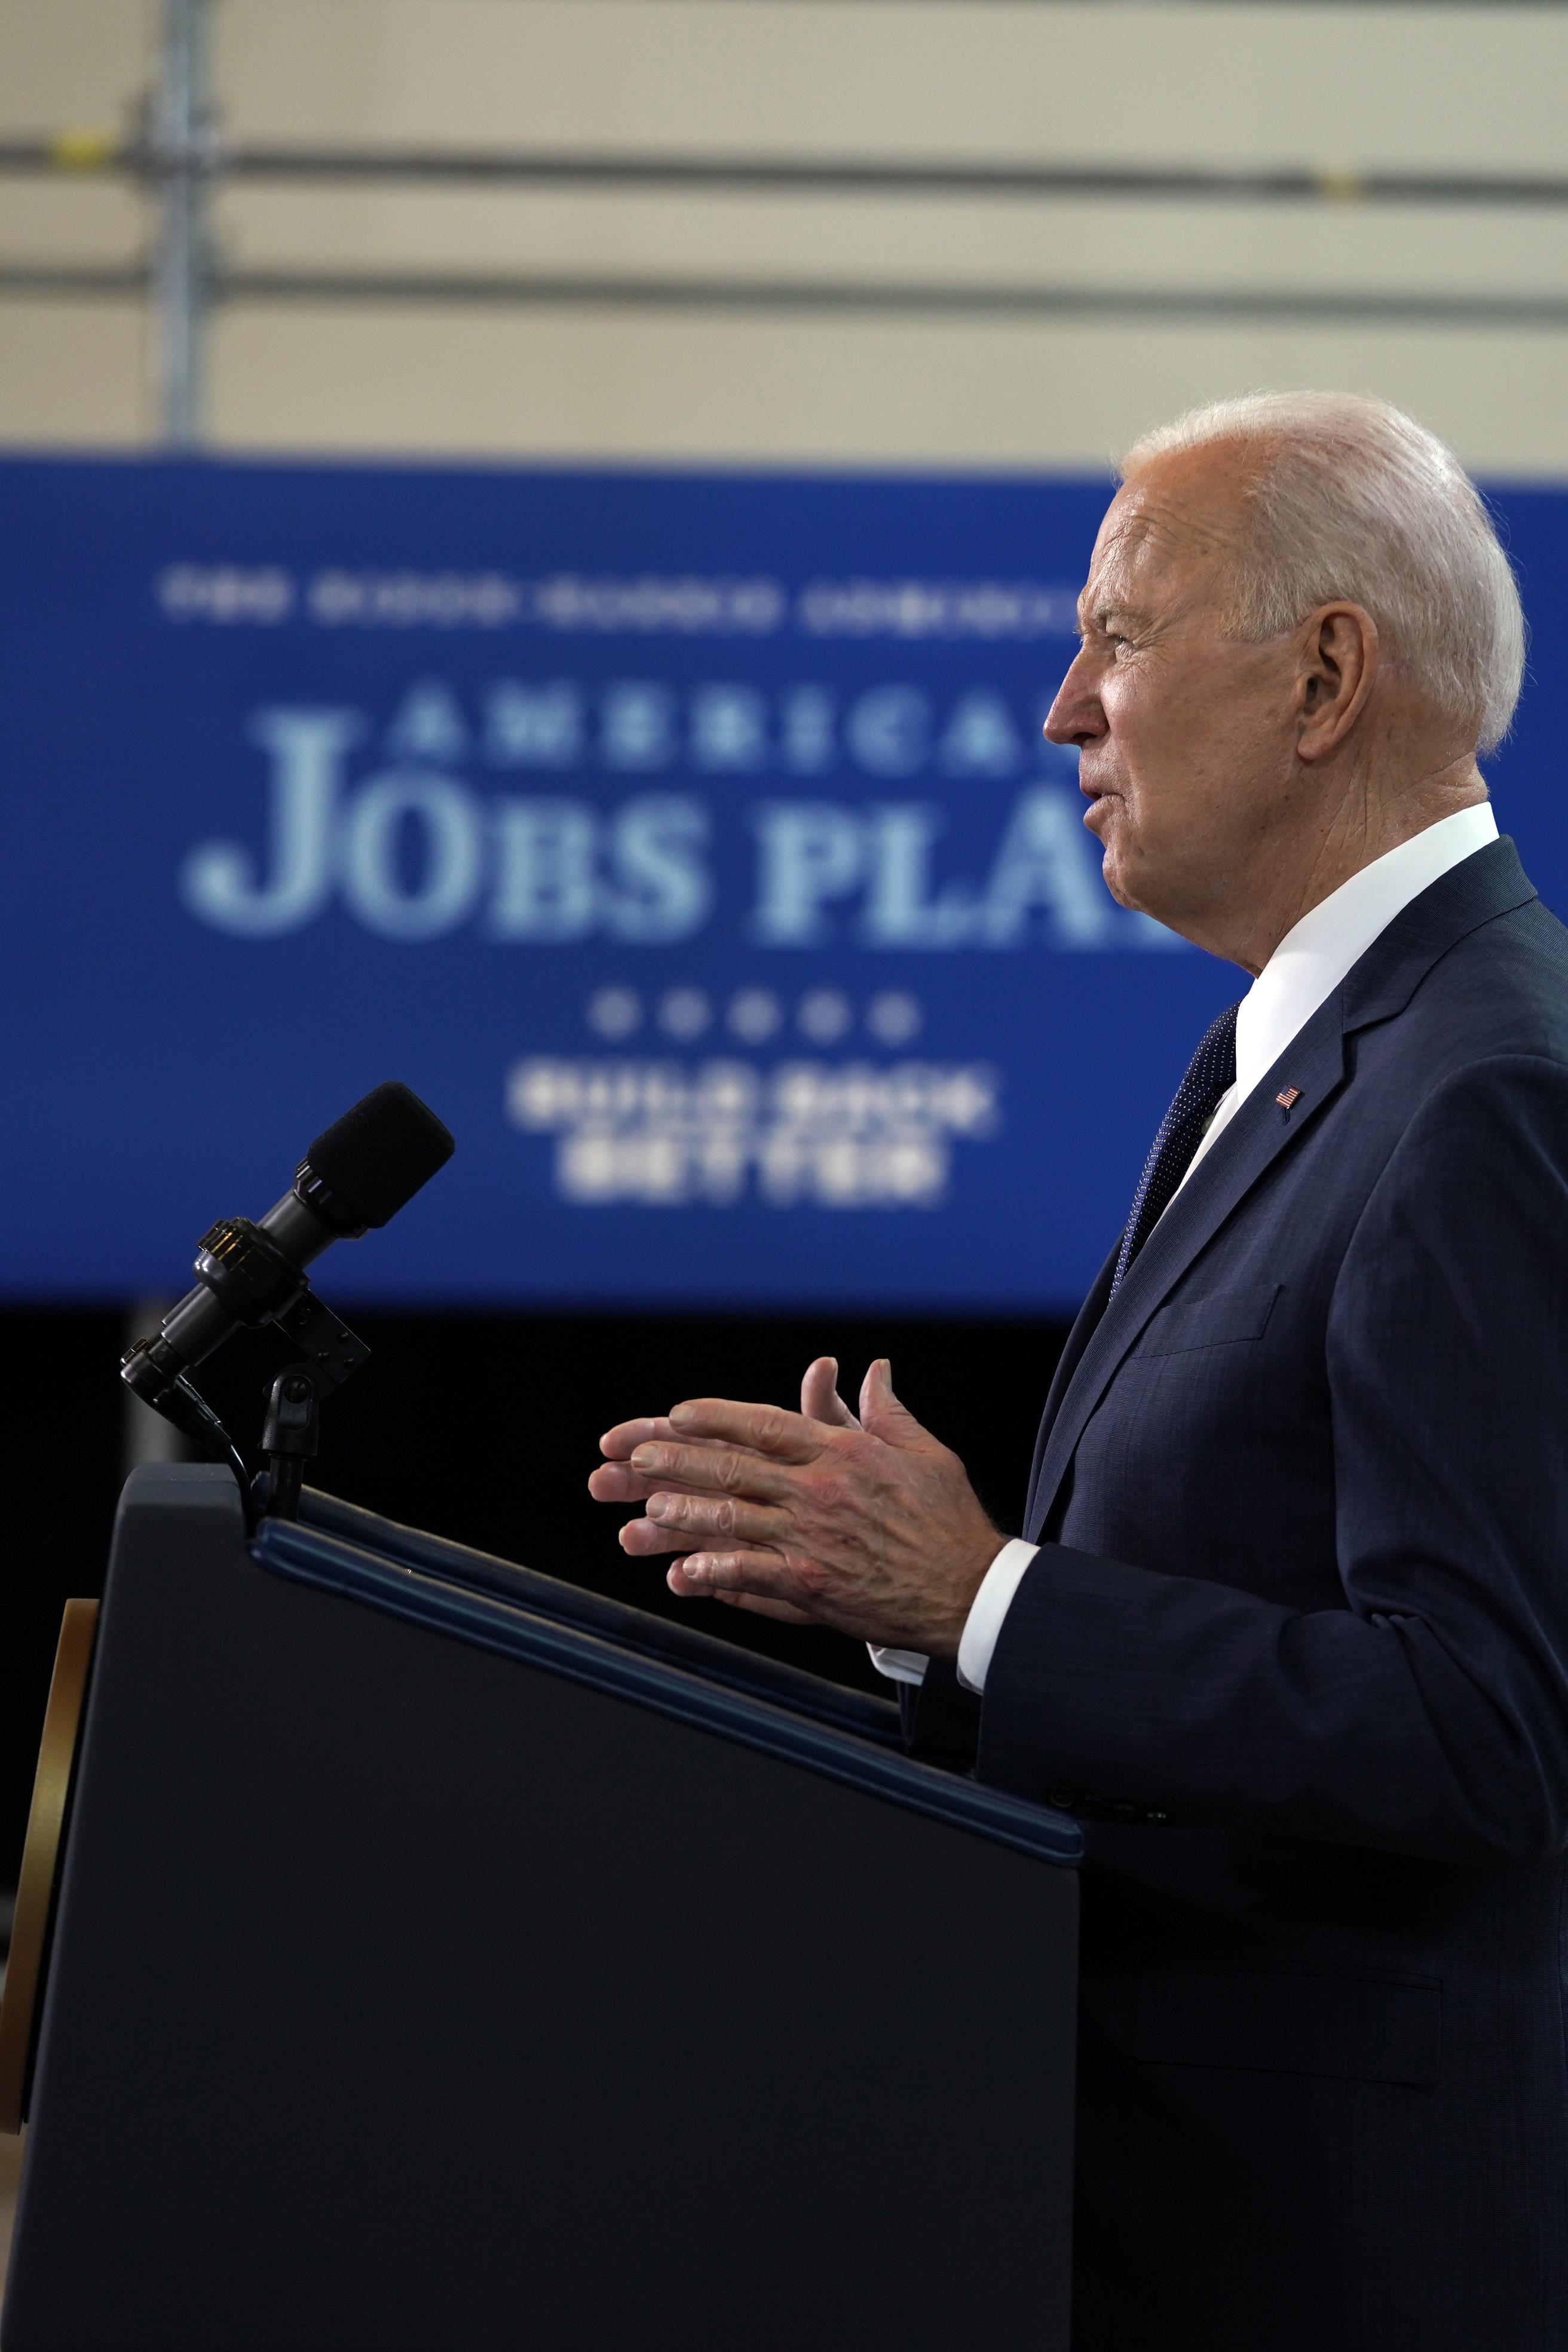 President Joe Biden talks about his infrastructure plan at the Carpenters Pittsburgh Training Center in Pittsburgh on Wednesday, March, 31 2021. President Biden appeared in western Pennsylvania Wednesday afternoon to unveil his $2 trillion infrastructure plan, a far-reaching proposal that he will seek to pay for with a substantial increase in corporate taxes. Anna Moneymaker/The New York Times)